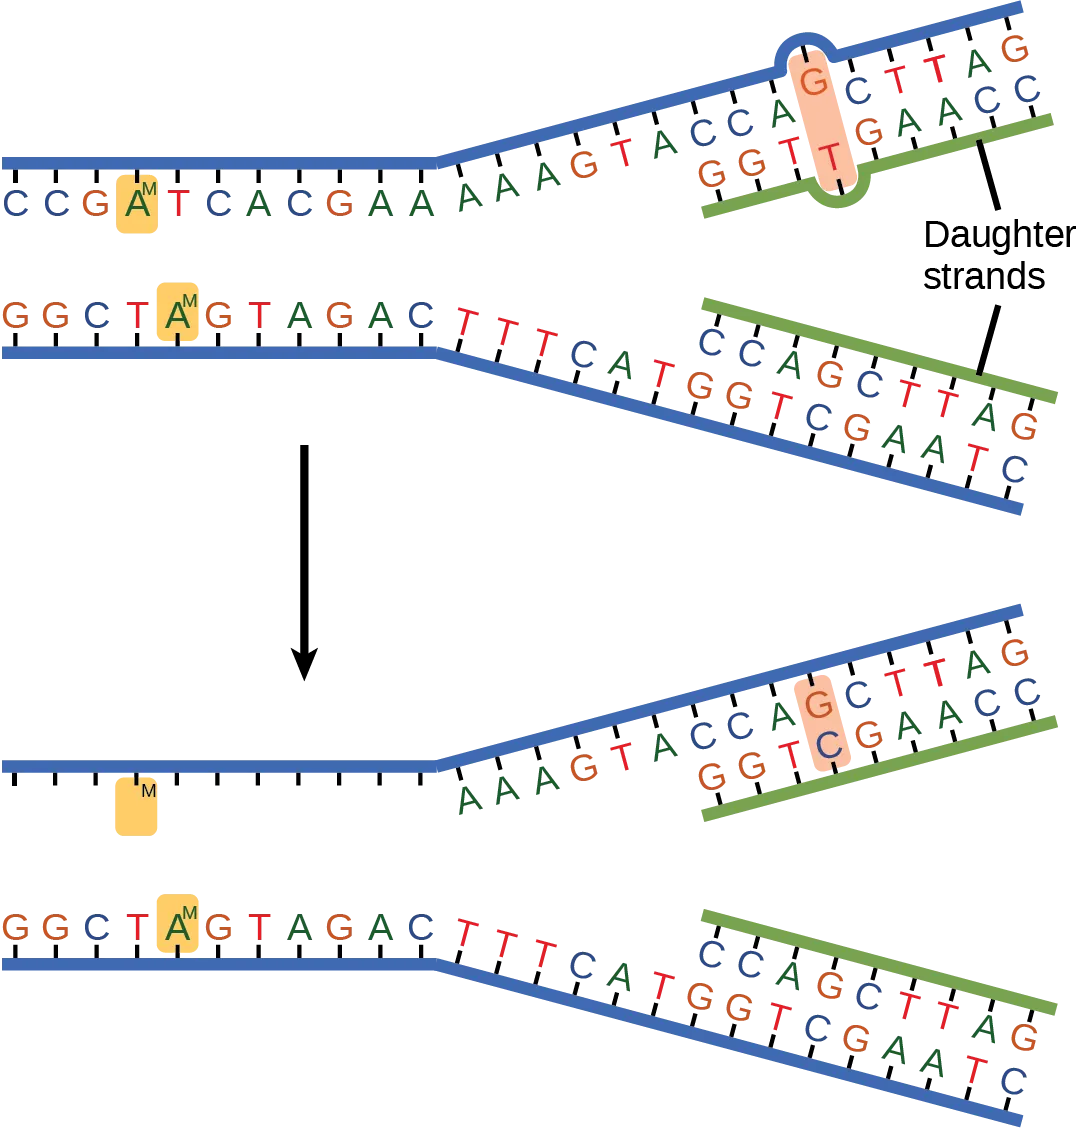 The top illustration shows a replicated D N A strand with G T base mismatch. The bottom illustration shows the repaired D N A, which has the correct G C base pairing.